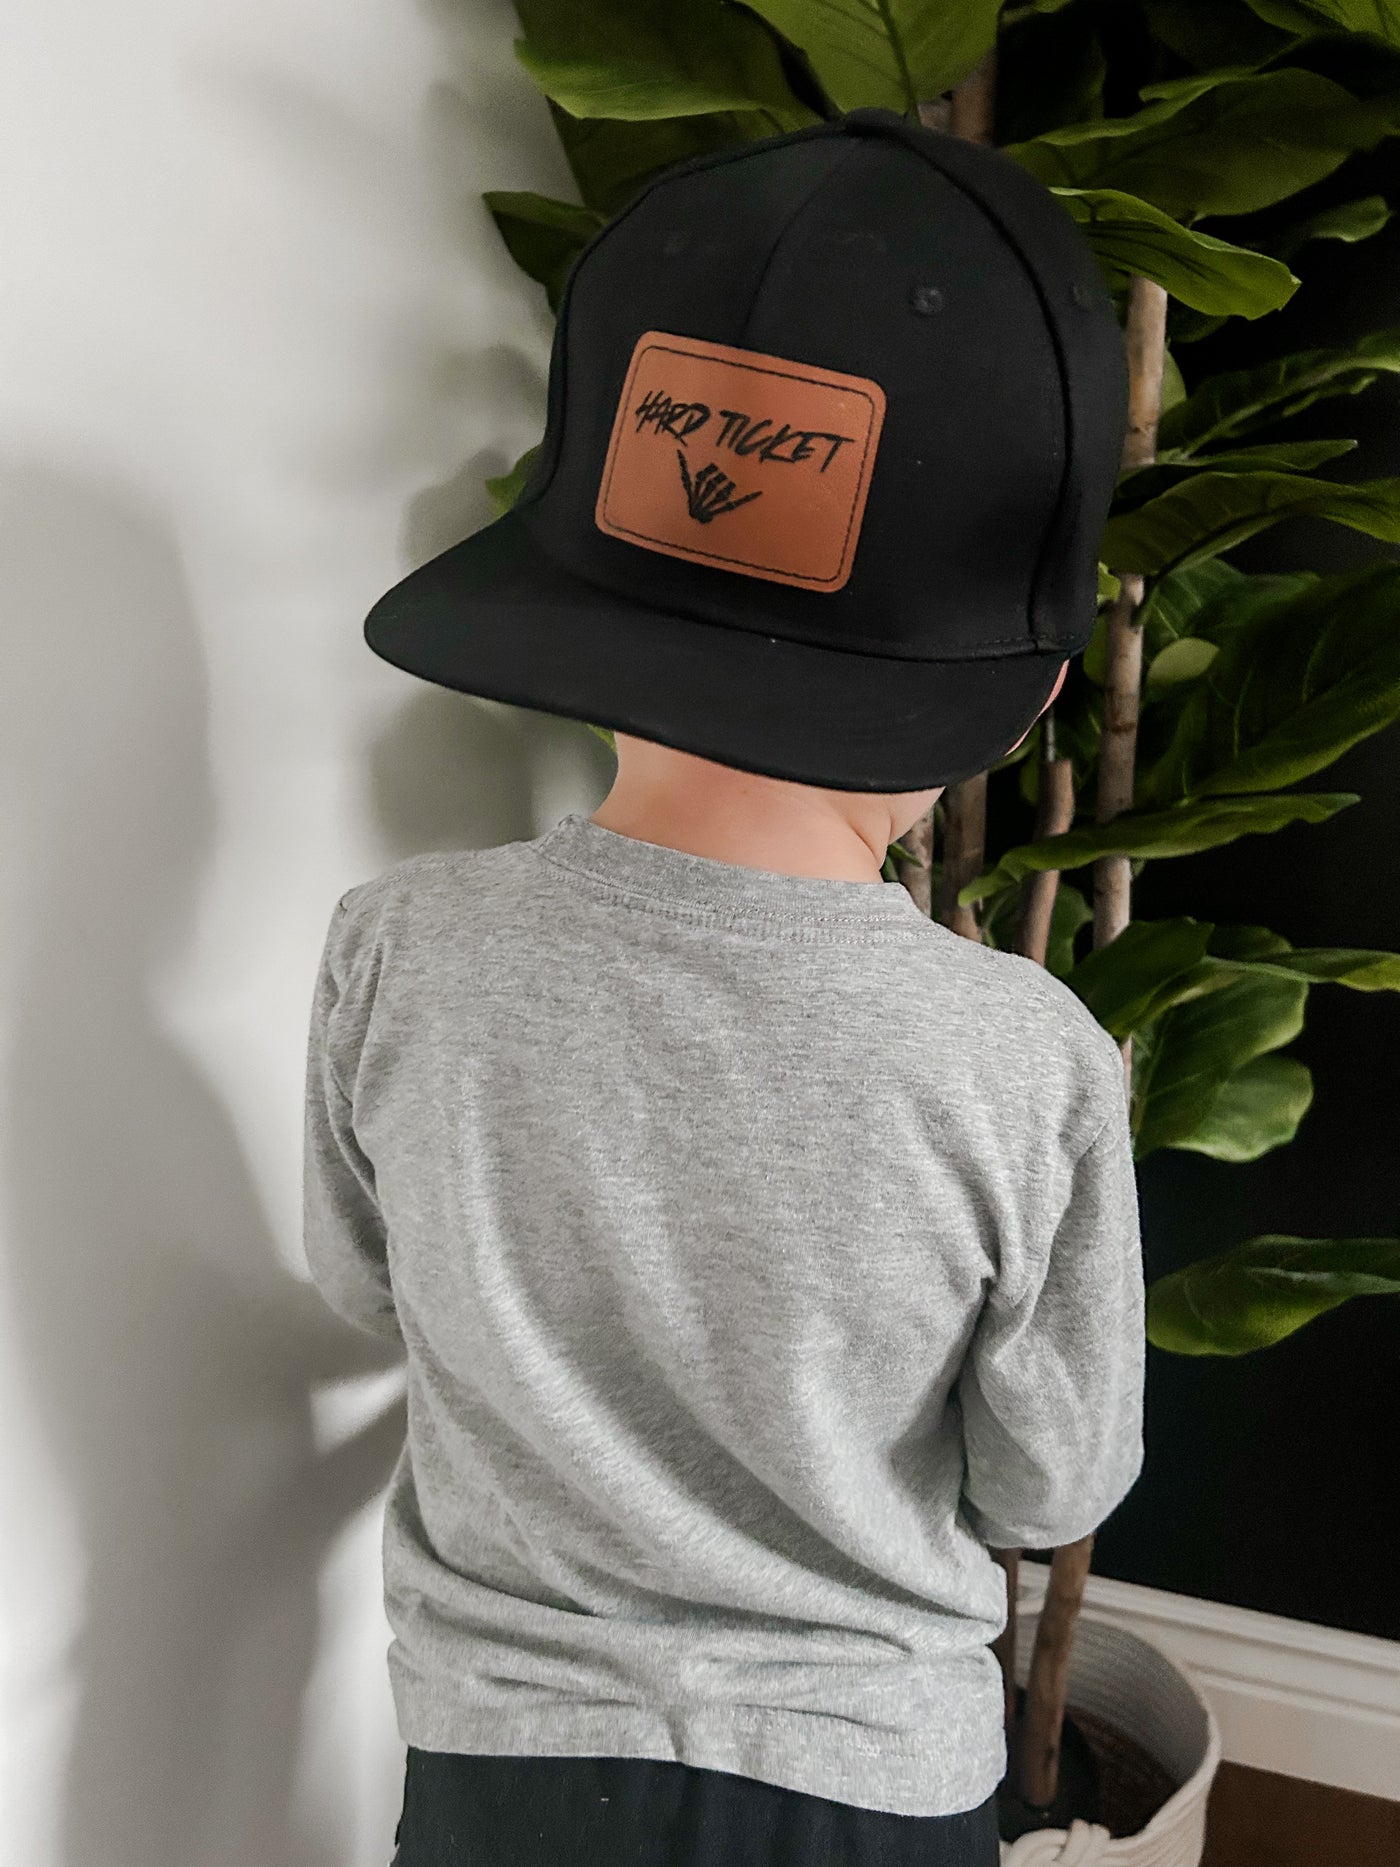 "Hard Ticket" Leather Patch Youth Baseball Hat